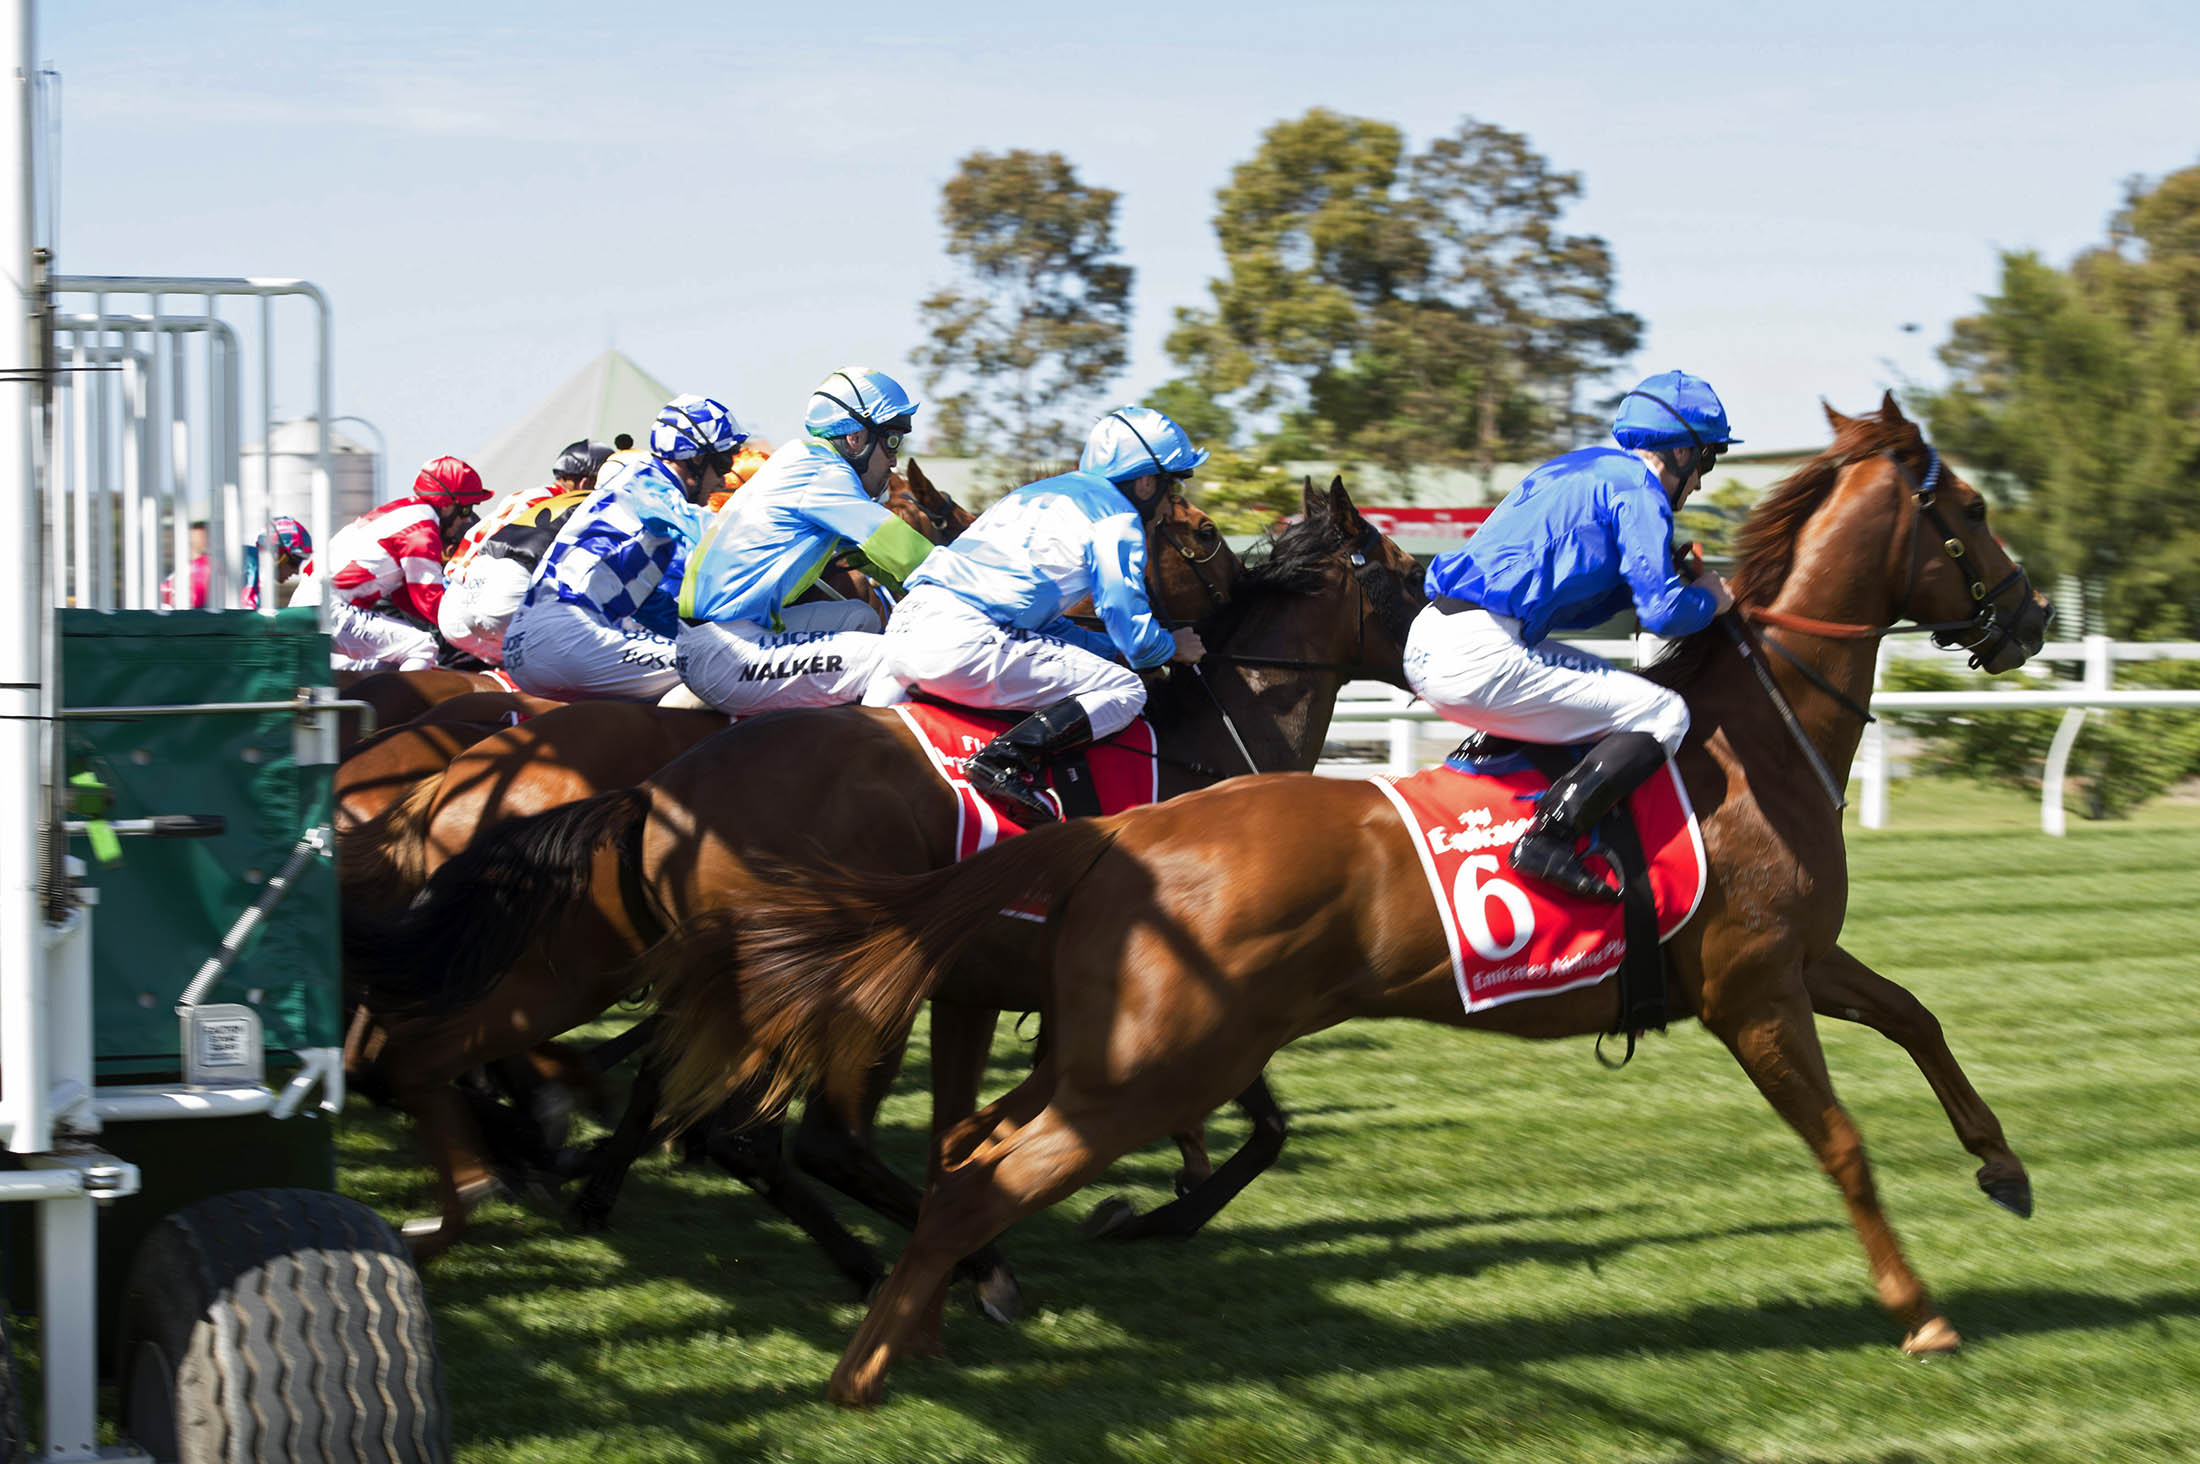 Horses gallop from the starting gate during the first race on Melbourne Cup day at the Flemington racecourse in Melbourne.
